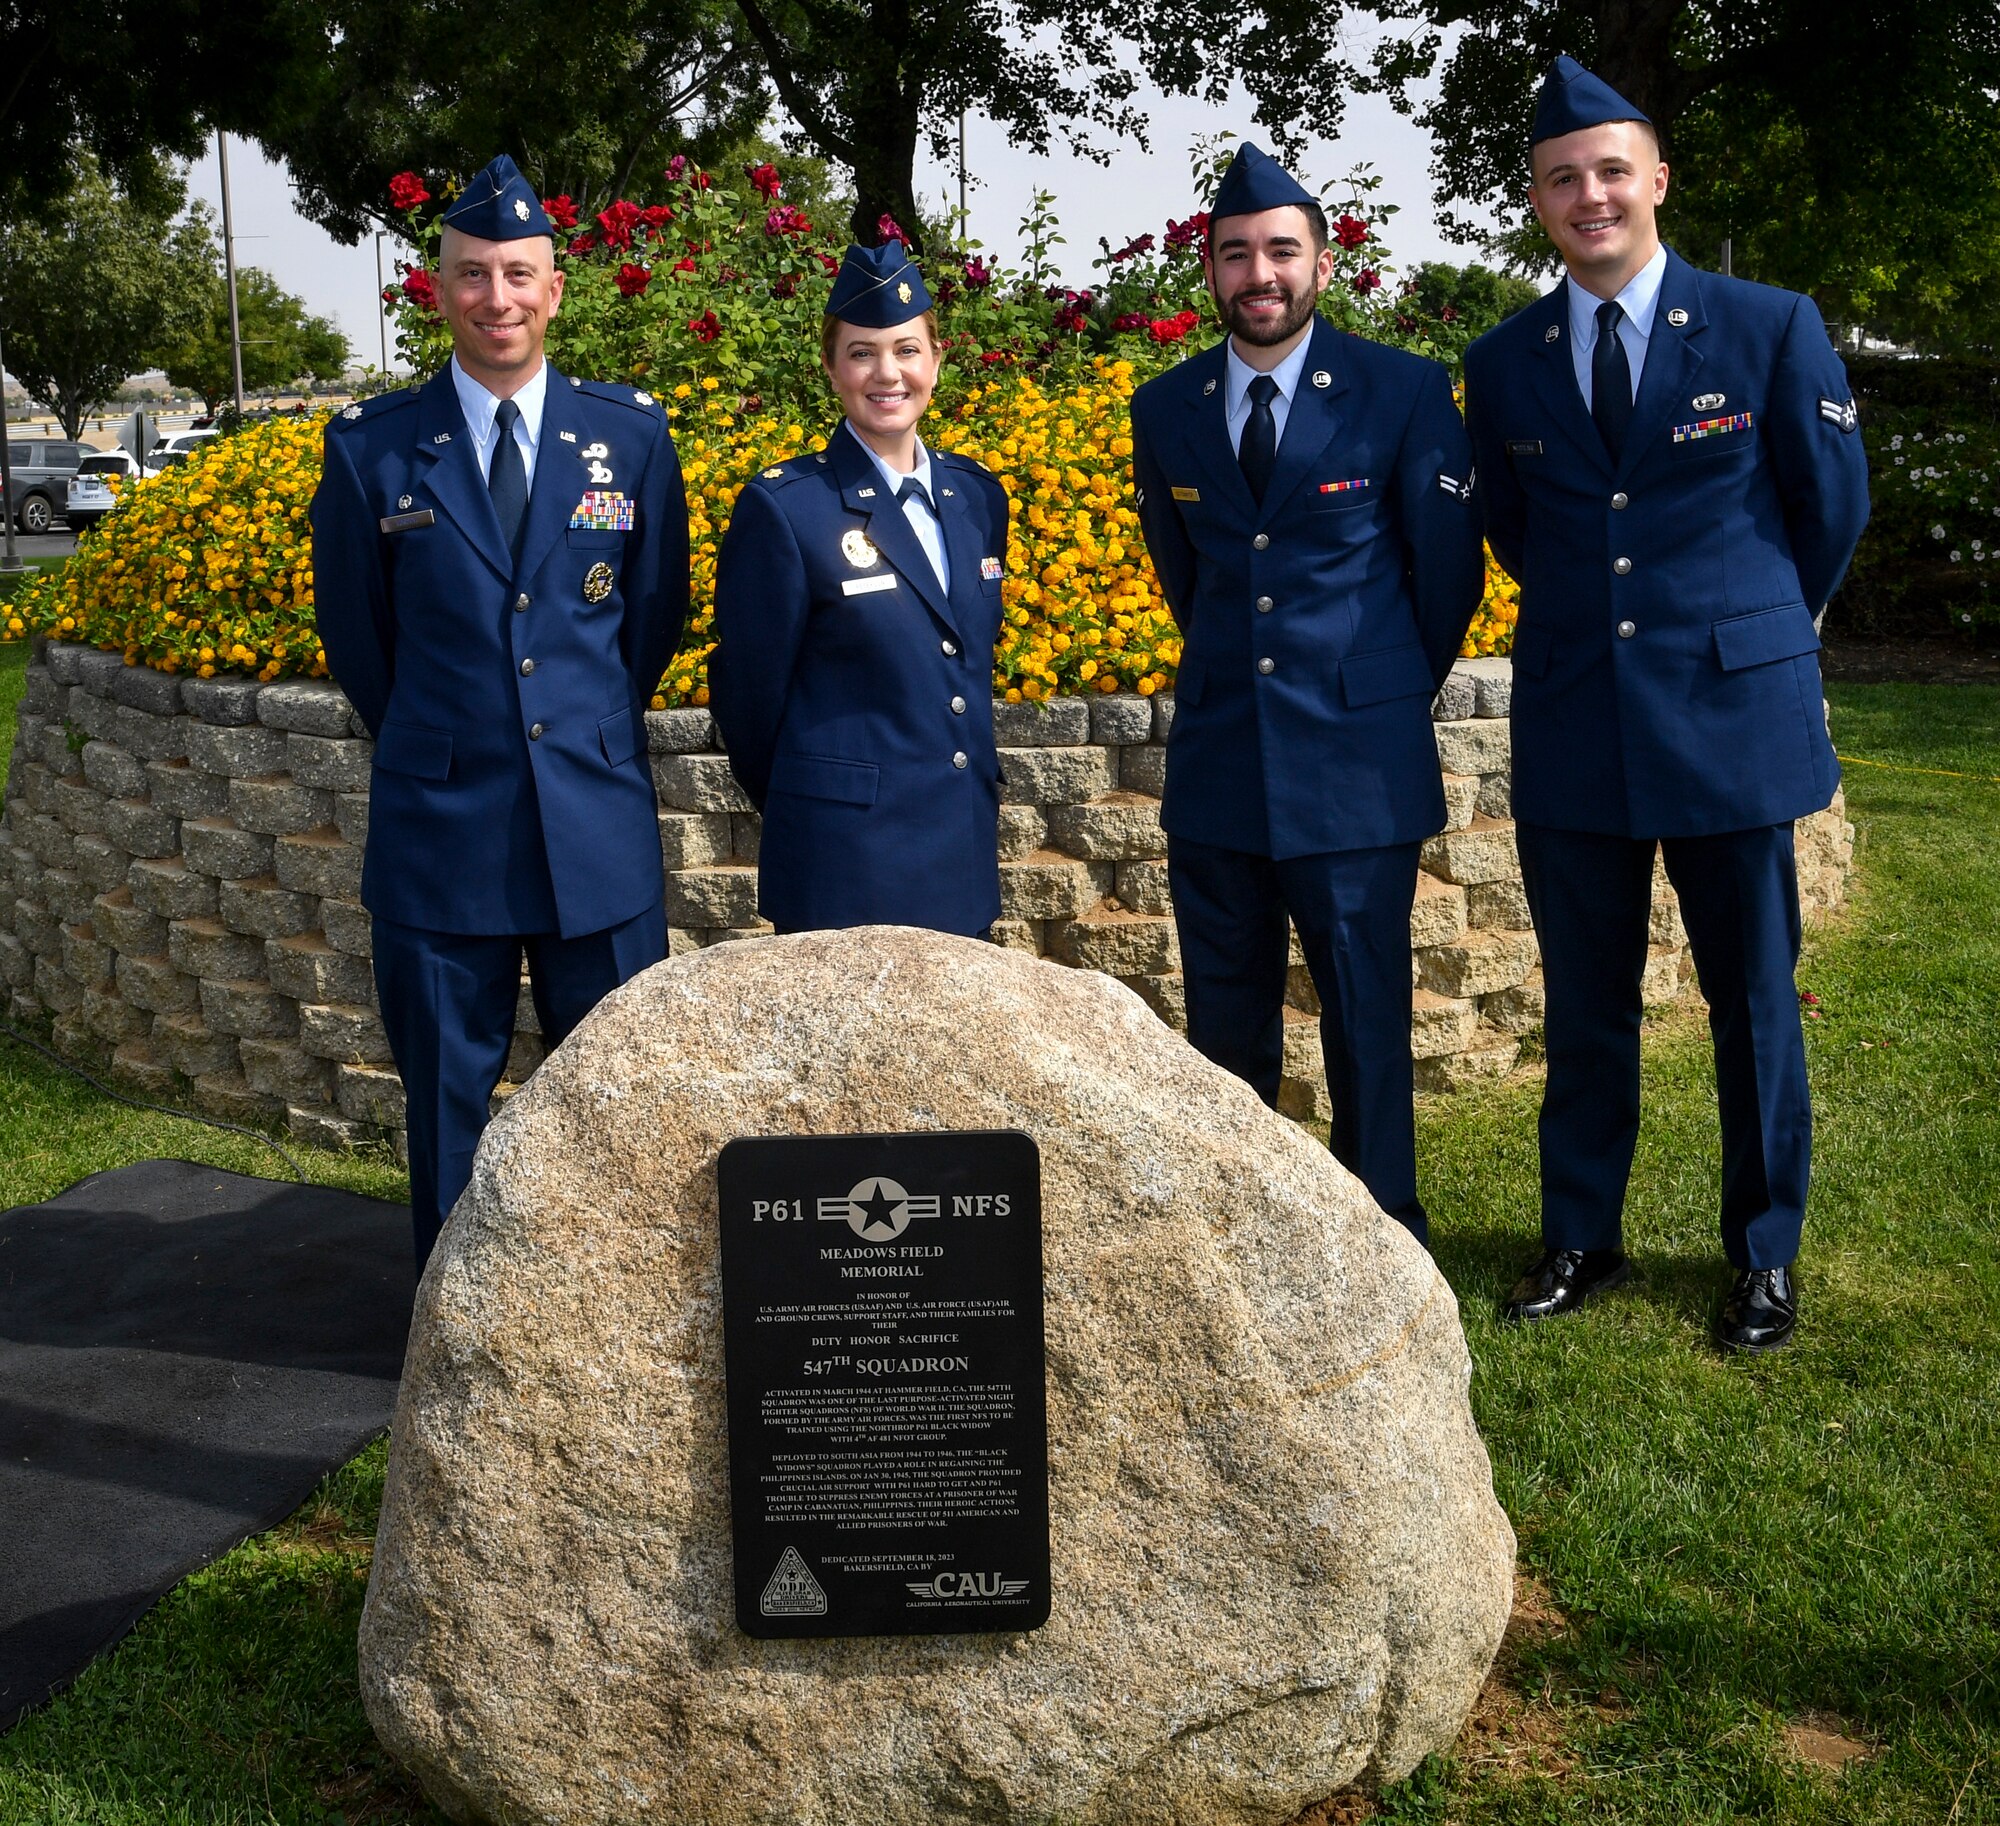 Four Airmen stand in front of a memorial plaque.